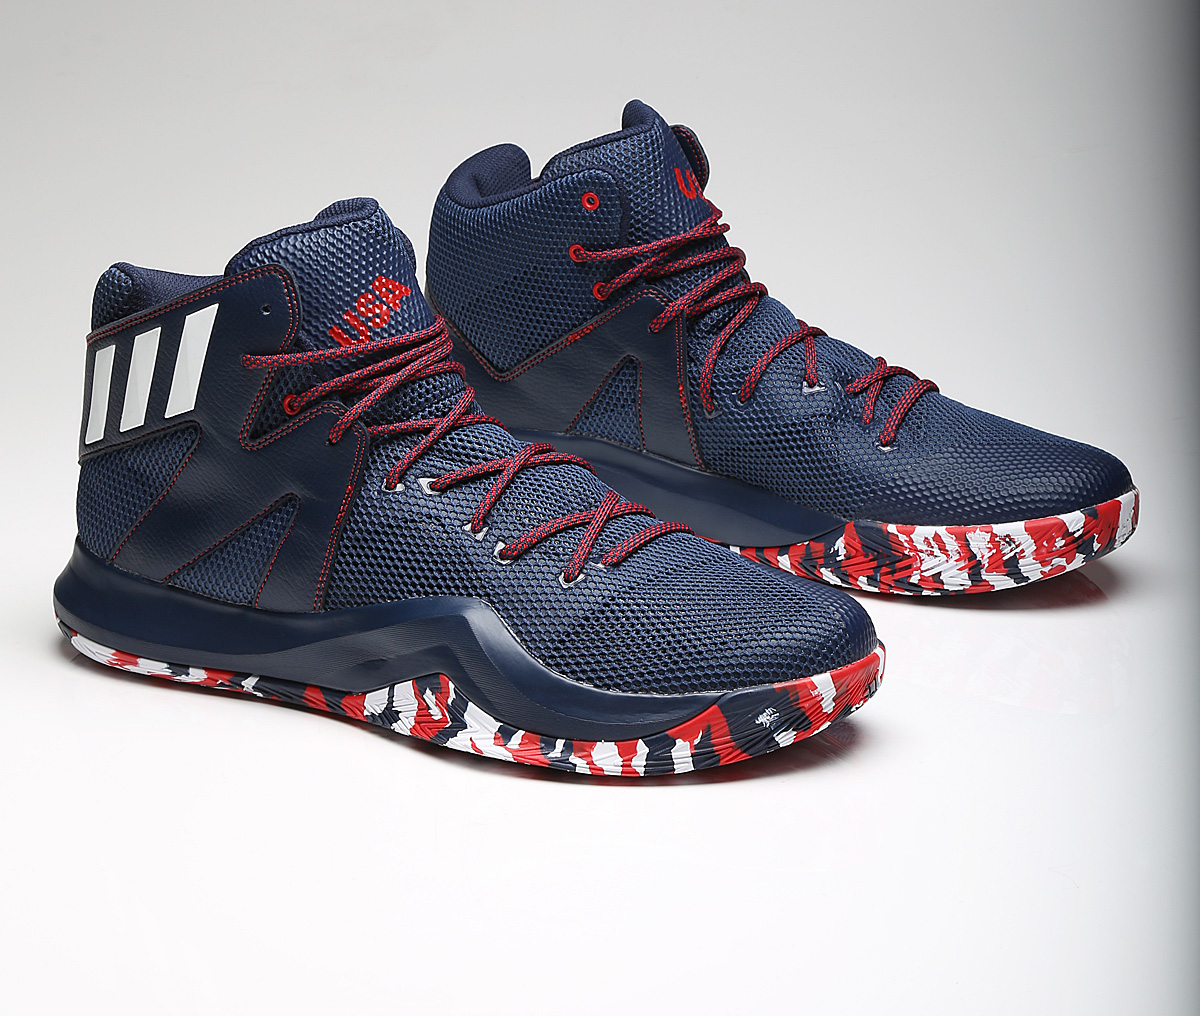 Get a Detailed Look at the adidas Crazy Bounce-1